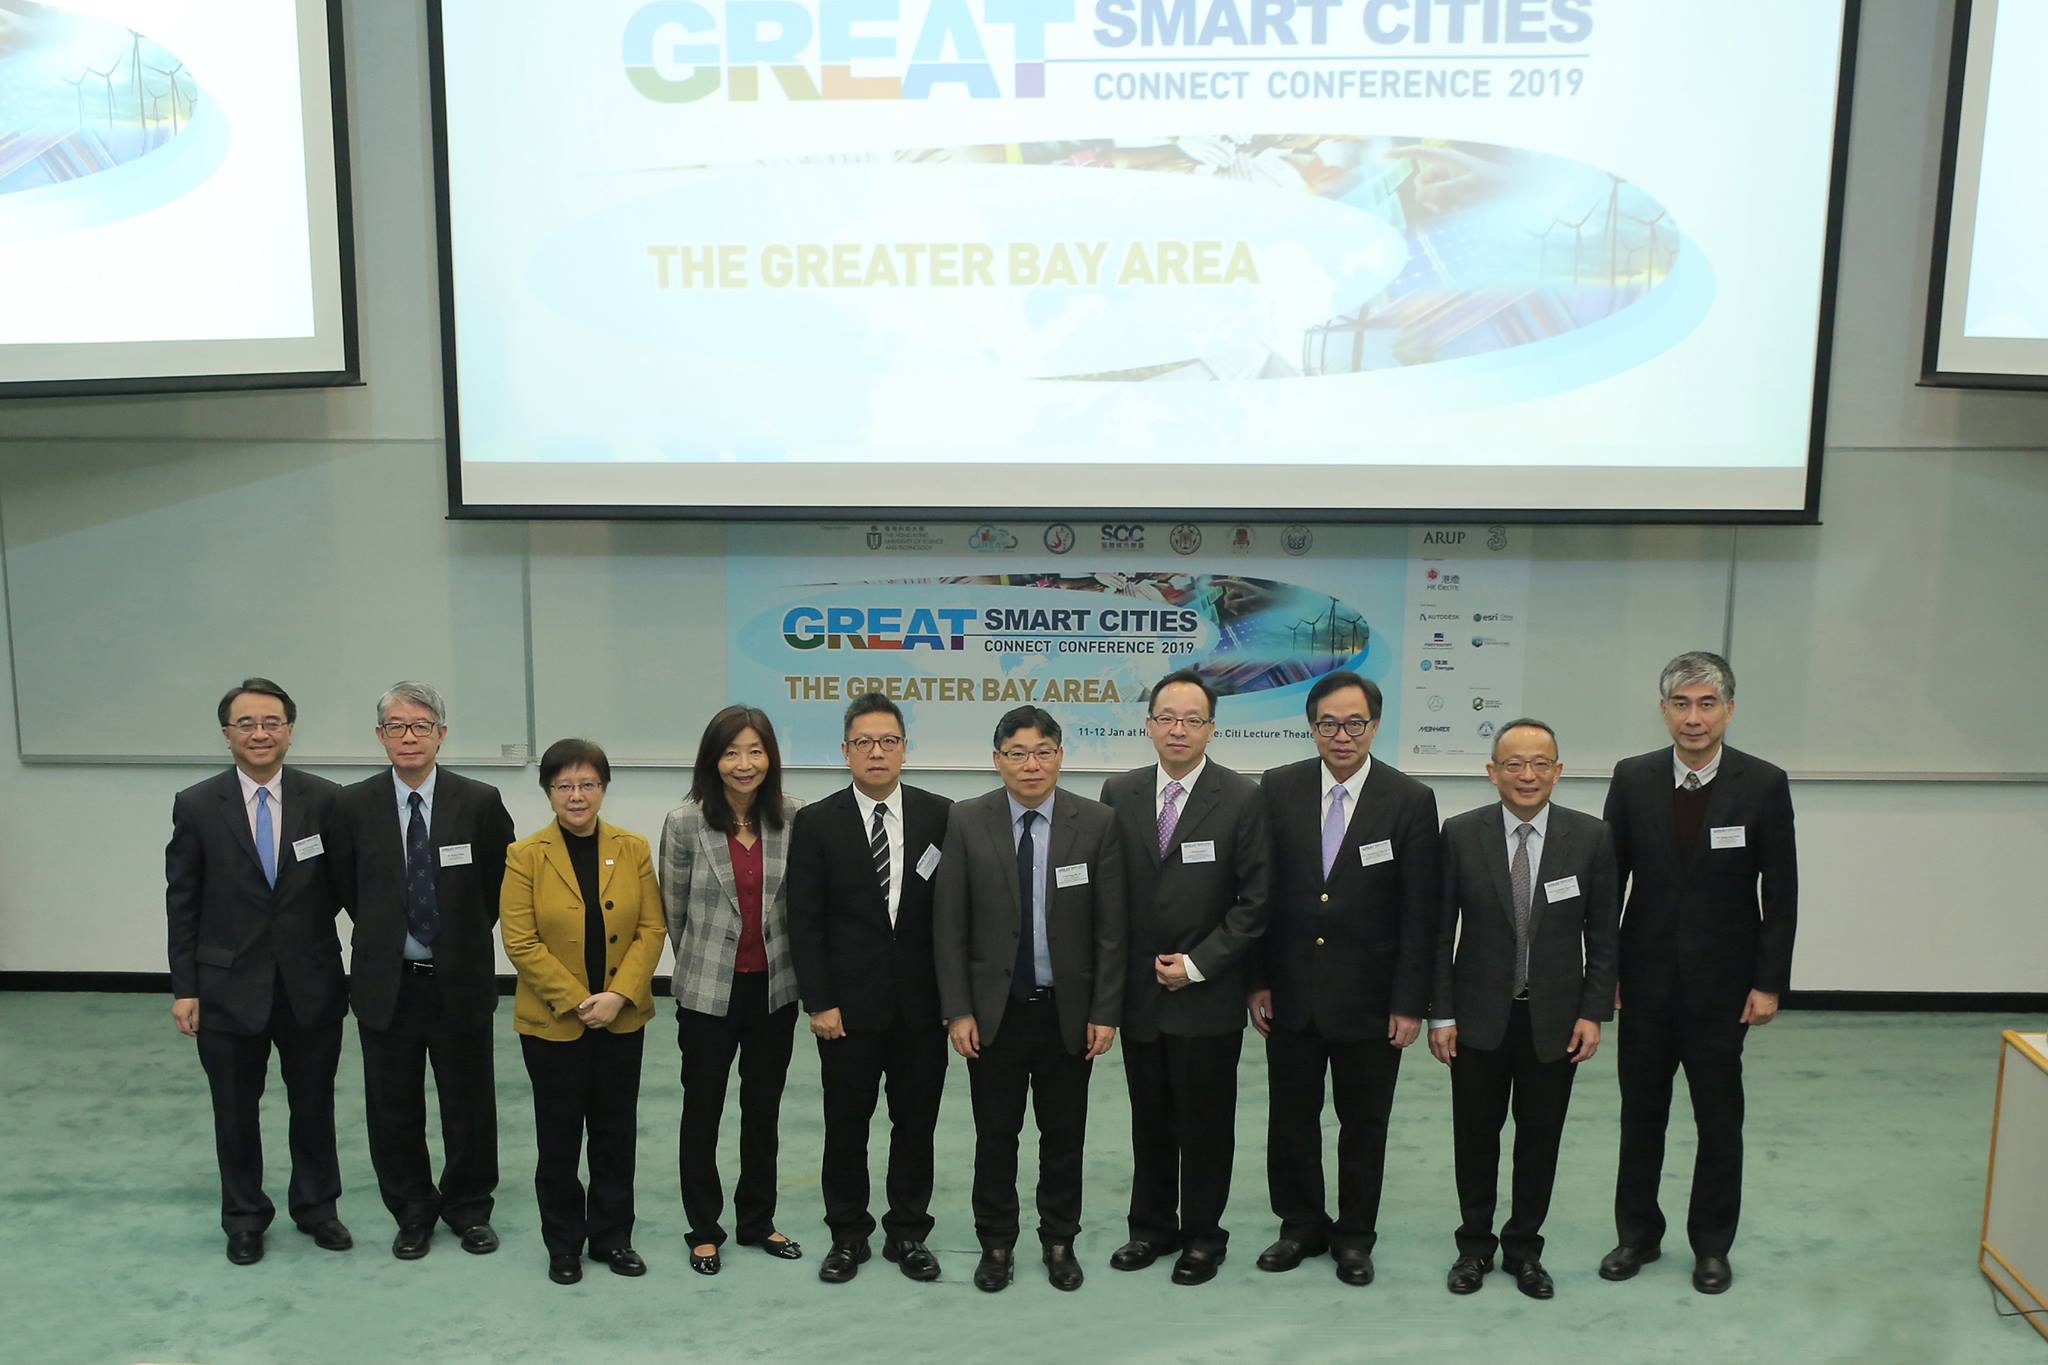 GREAT Smart Cities Connect Conference 2019 - The Greater Bay Area